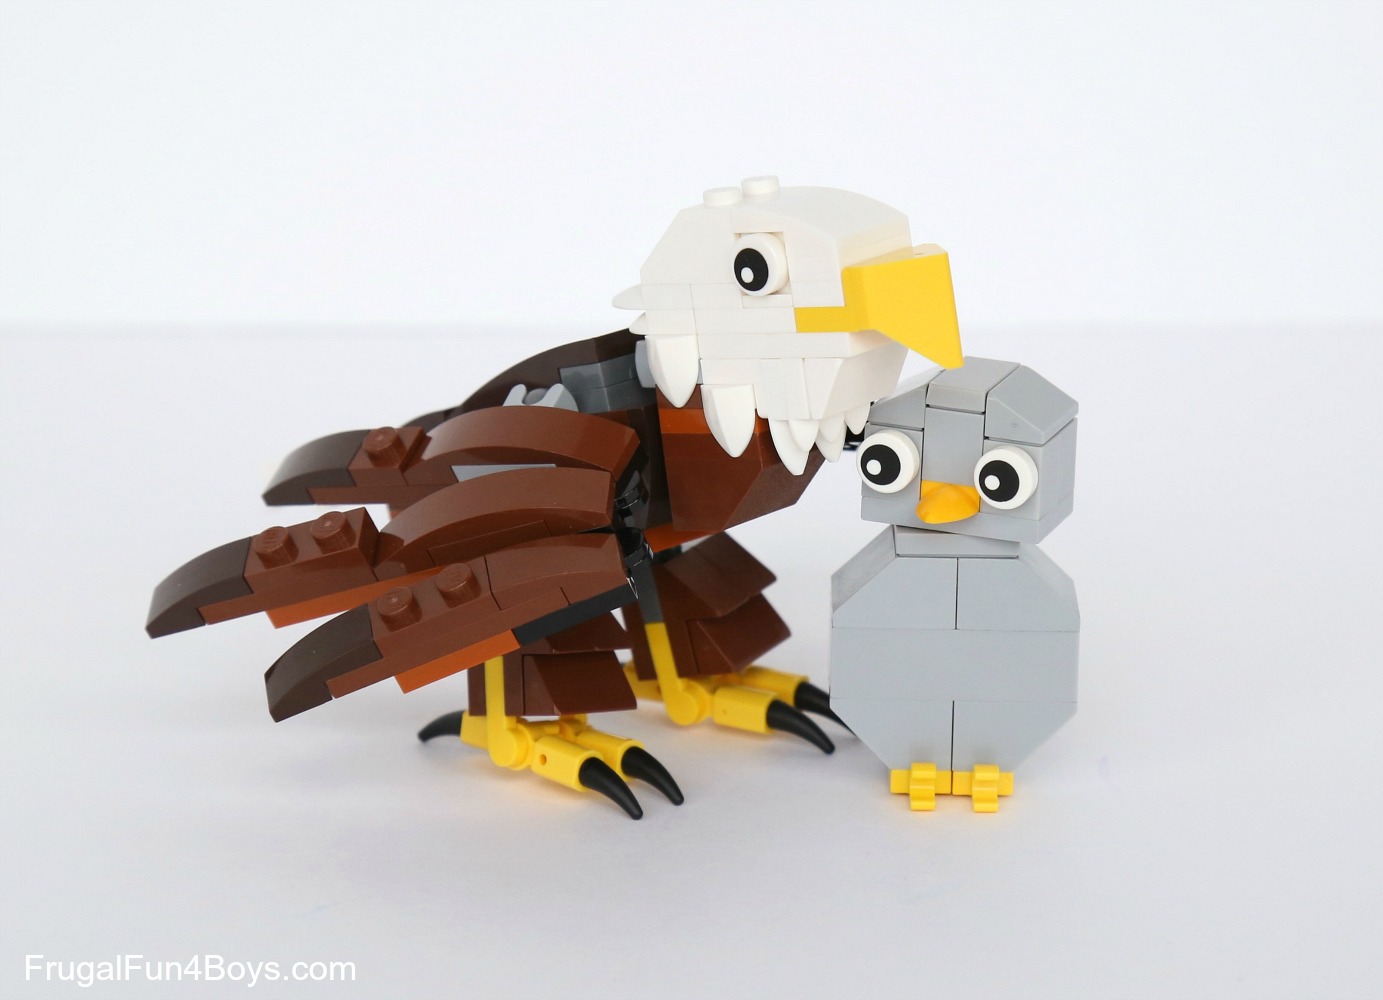 How to Build LEGO Eagles